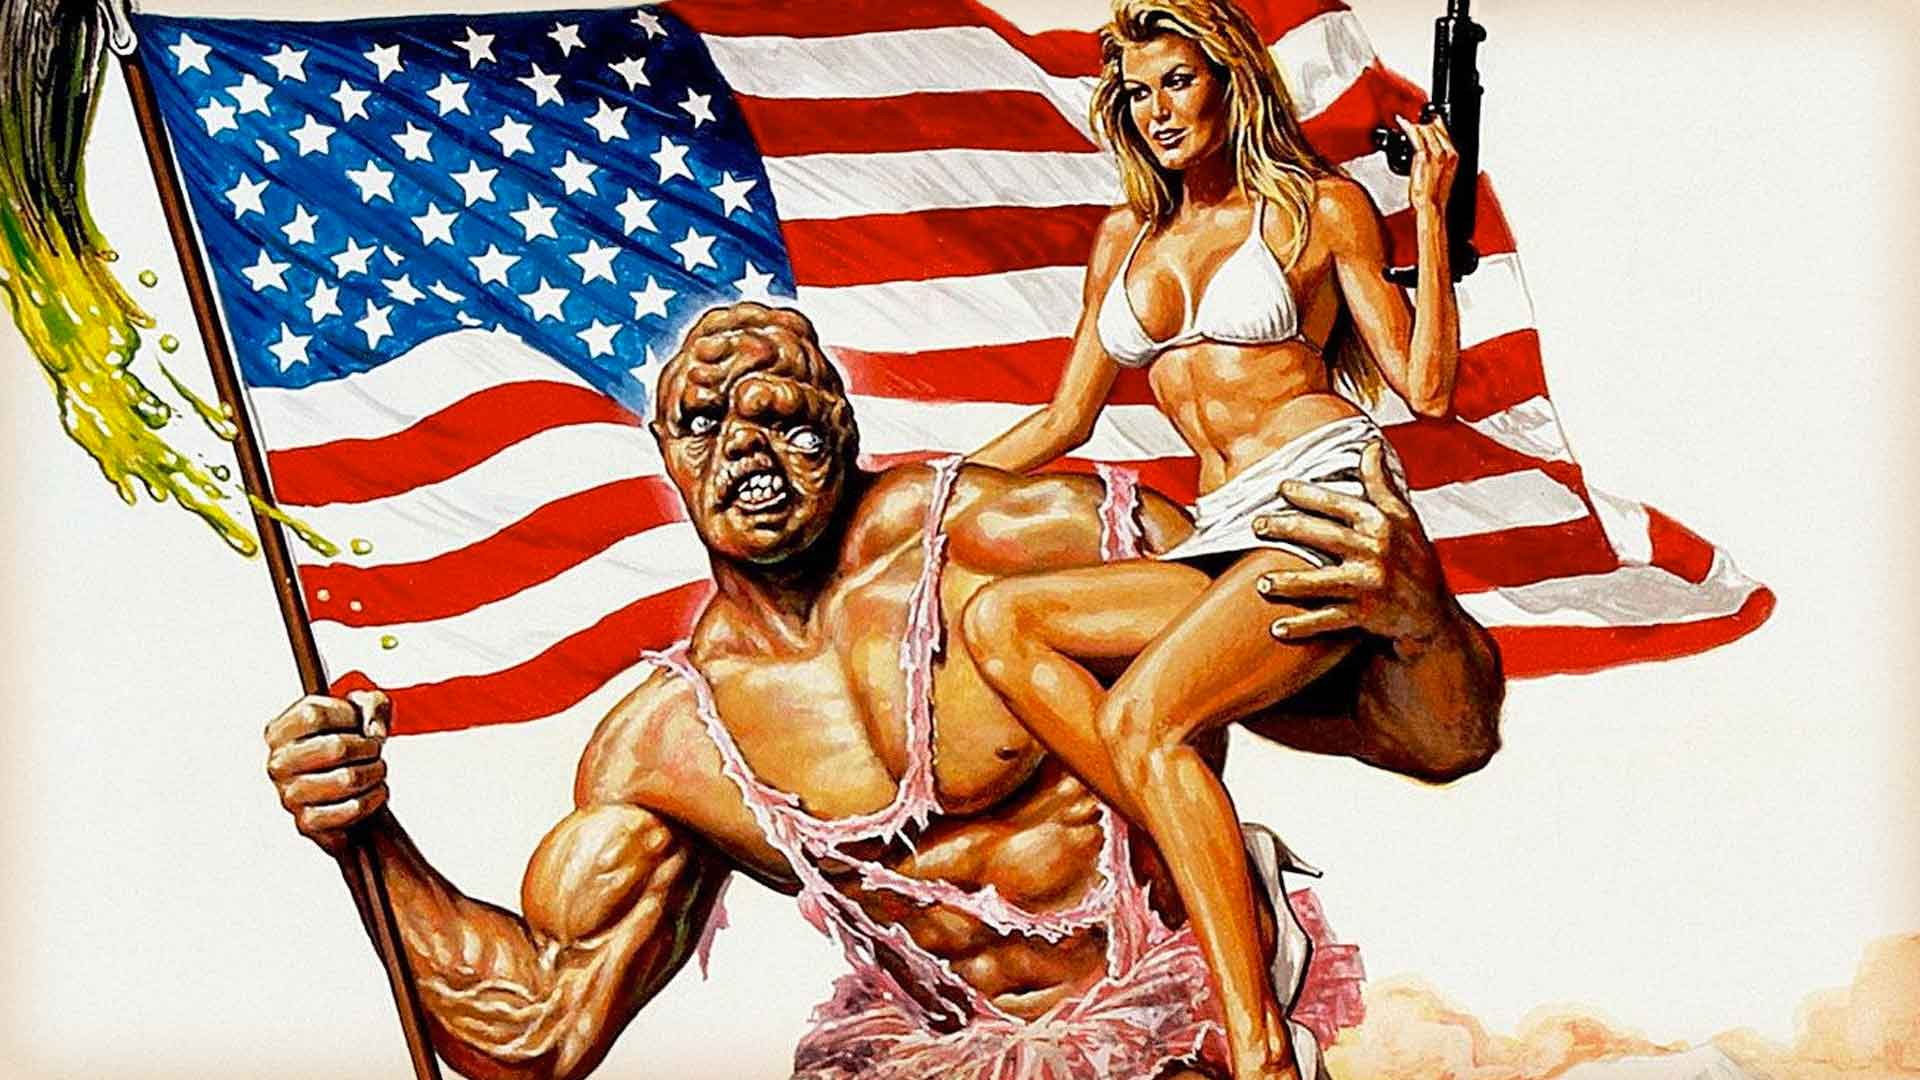 Can the Toxic Avenger Cure SXSW Panel Boredom?